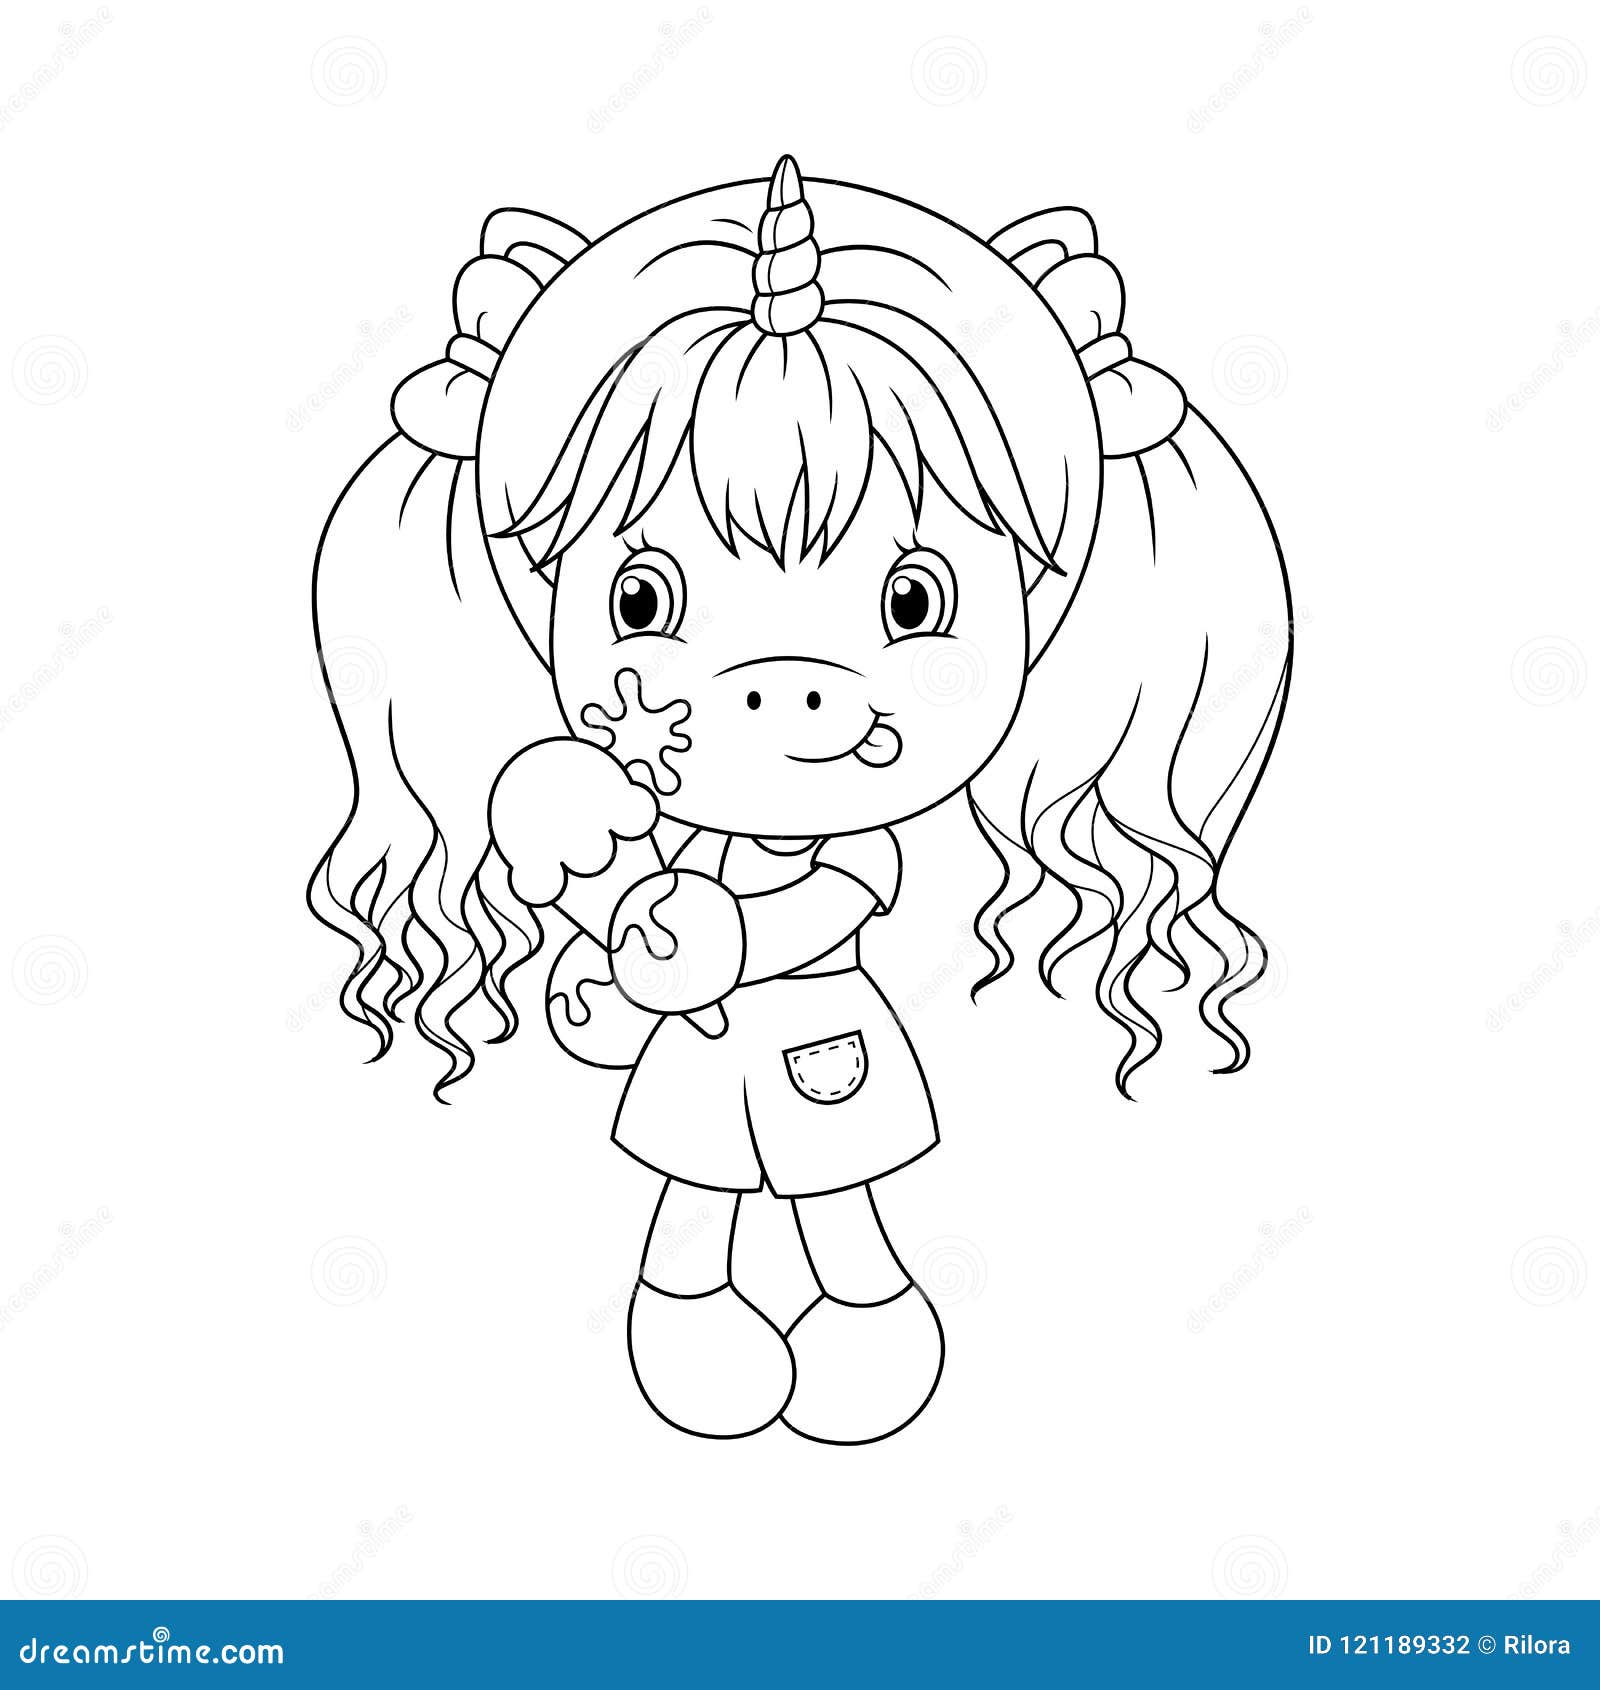 Cute Baby Unicorn Holding Ice Cream, Coloring Page For Girls. Vector. Stock Vector ...